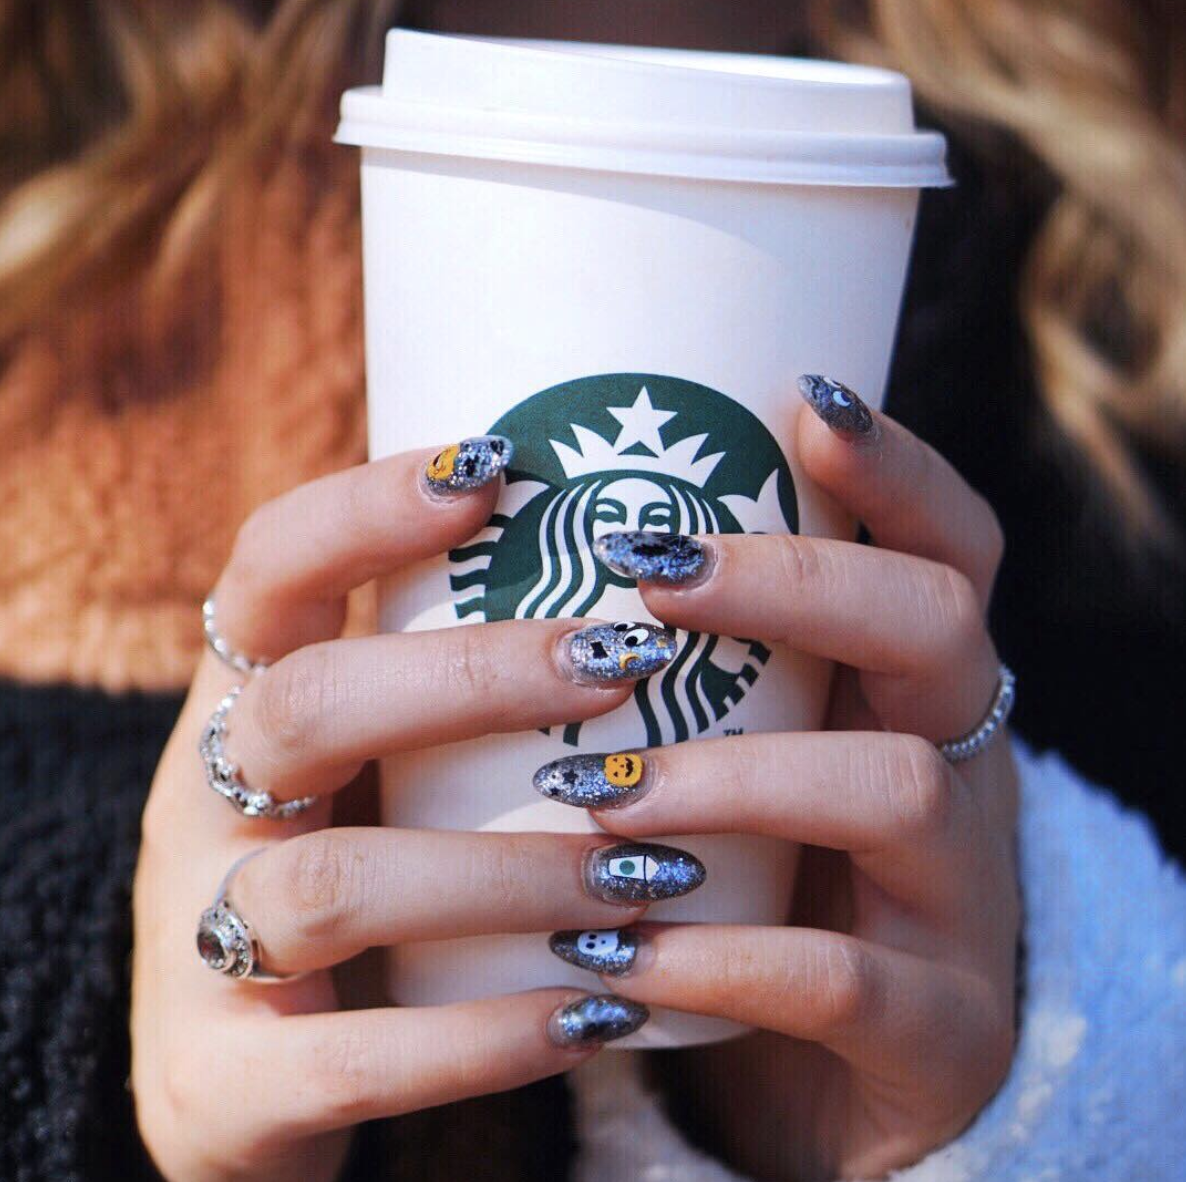 https://hips.hearstapps.com/hmg-prod/images/starbucks-nail-decals-1539367342.png